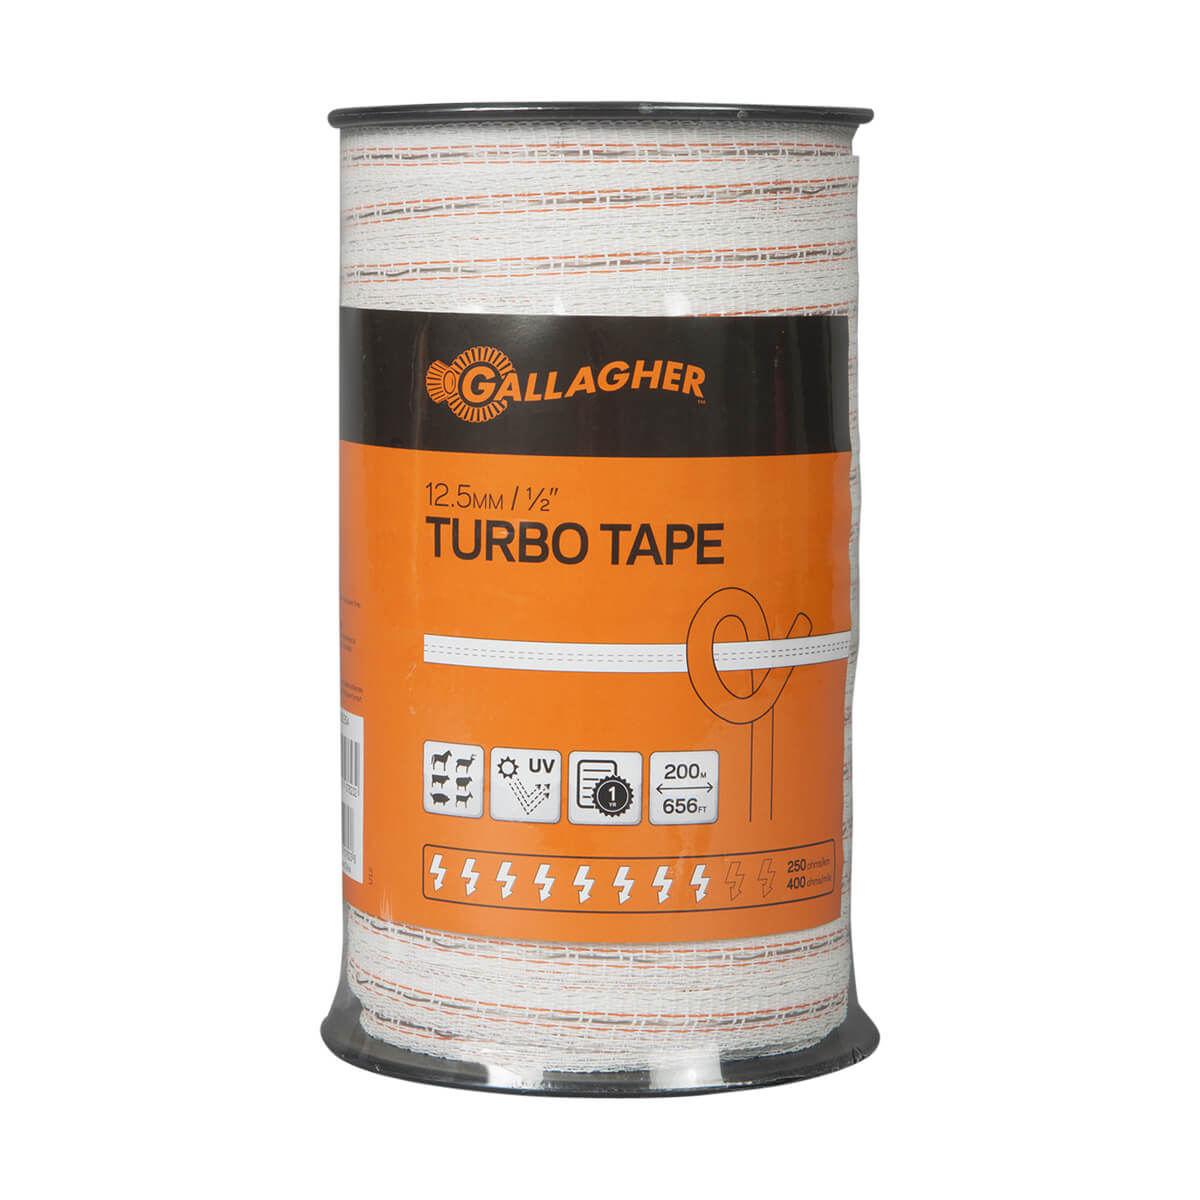 Gallagher 0.5-in Turbo Tape - 200 m